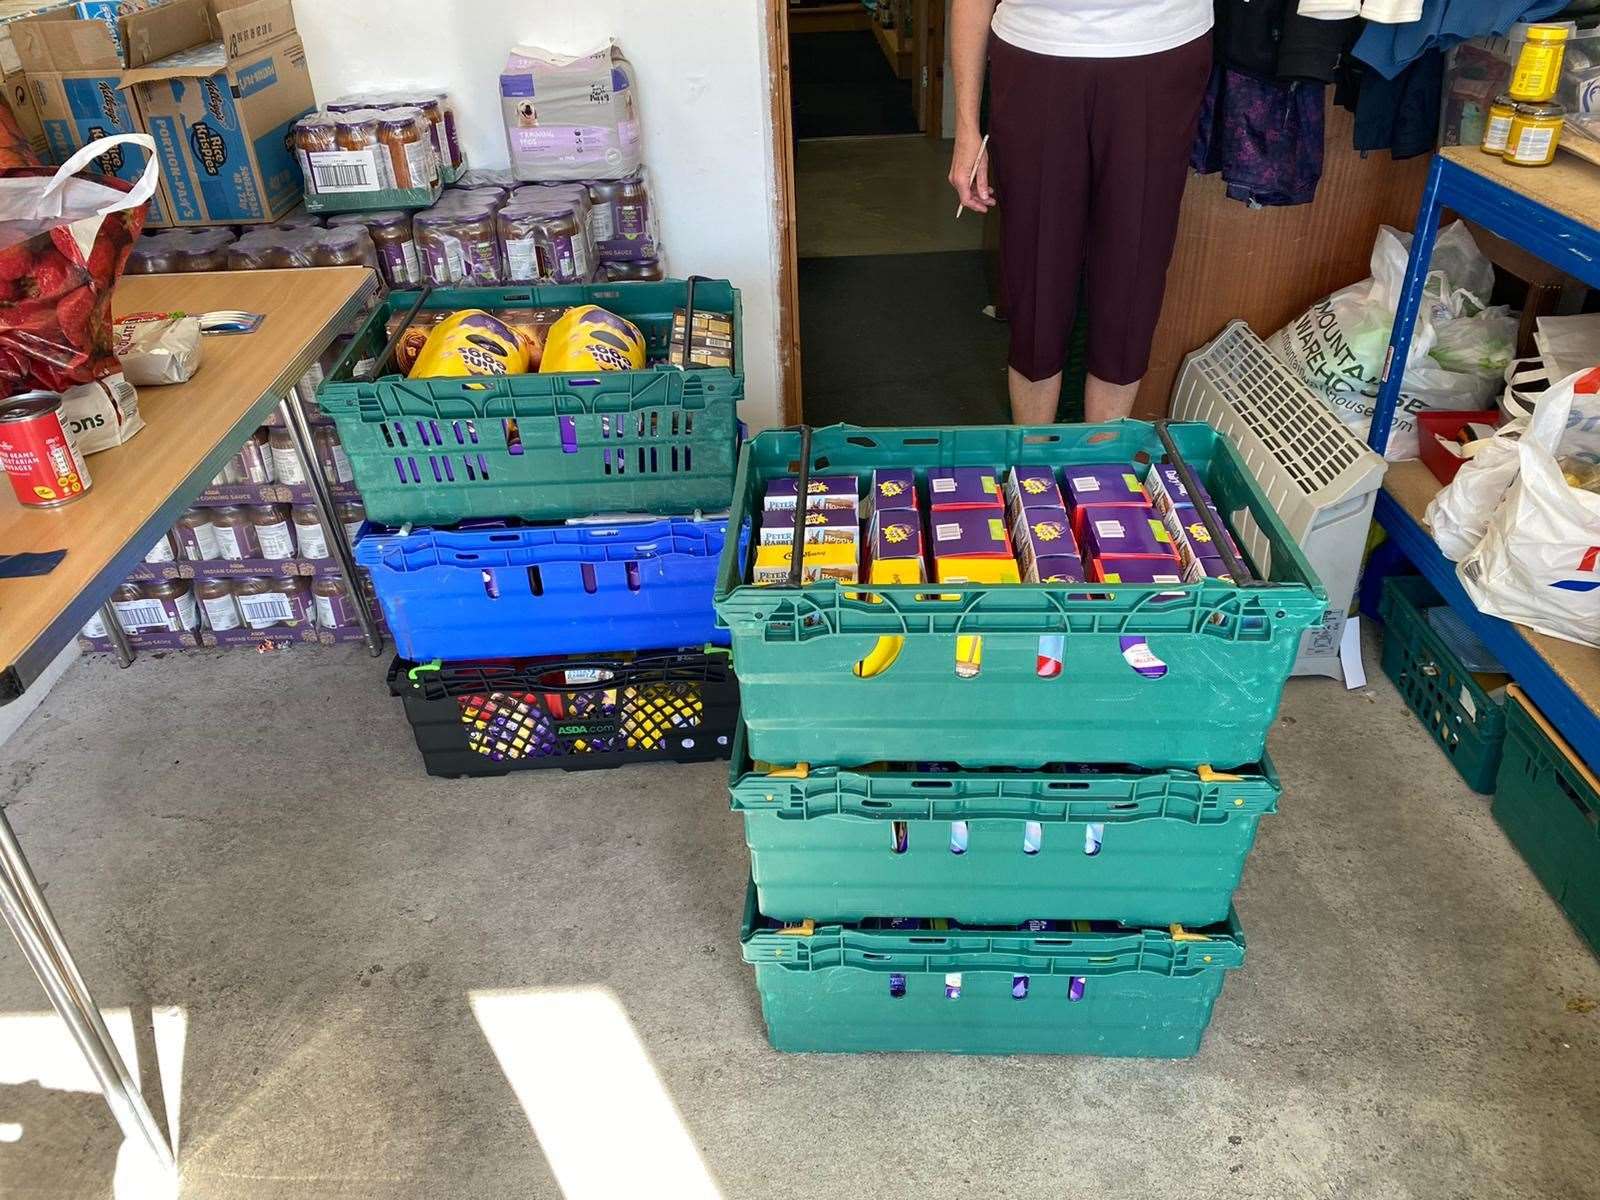 Kind donors like Priory Fields School gifted Easter eggs to Dover Foodbank at the beginning of the pandemic, and now volunteers are appealing for help for Christmas